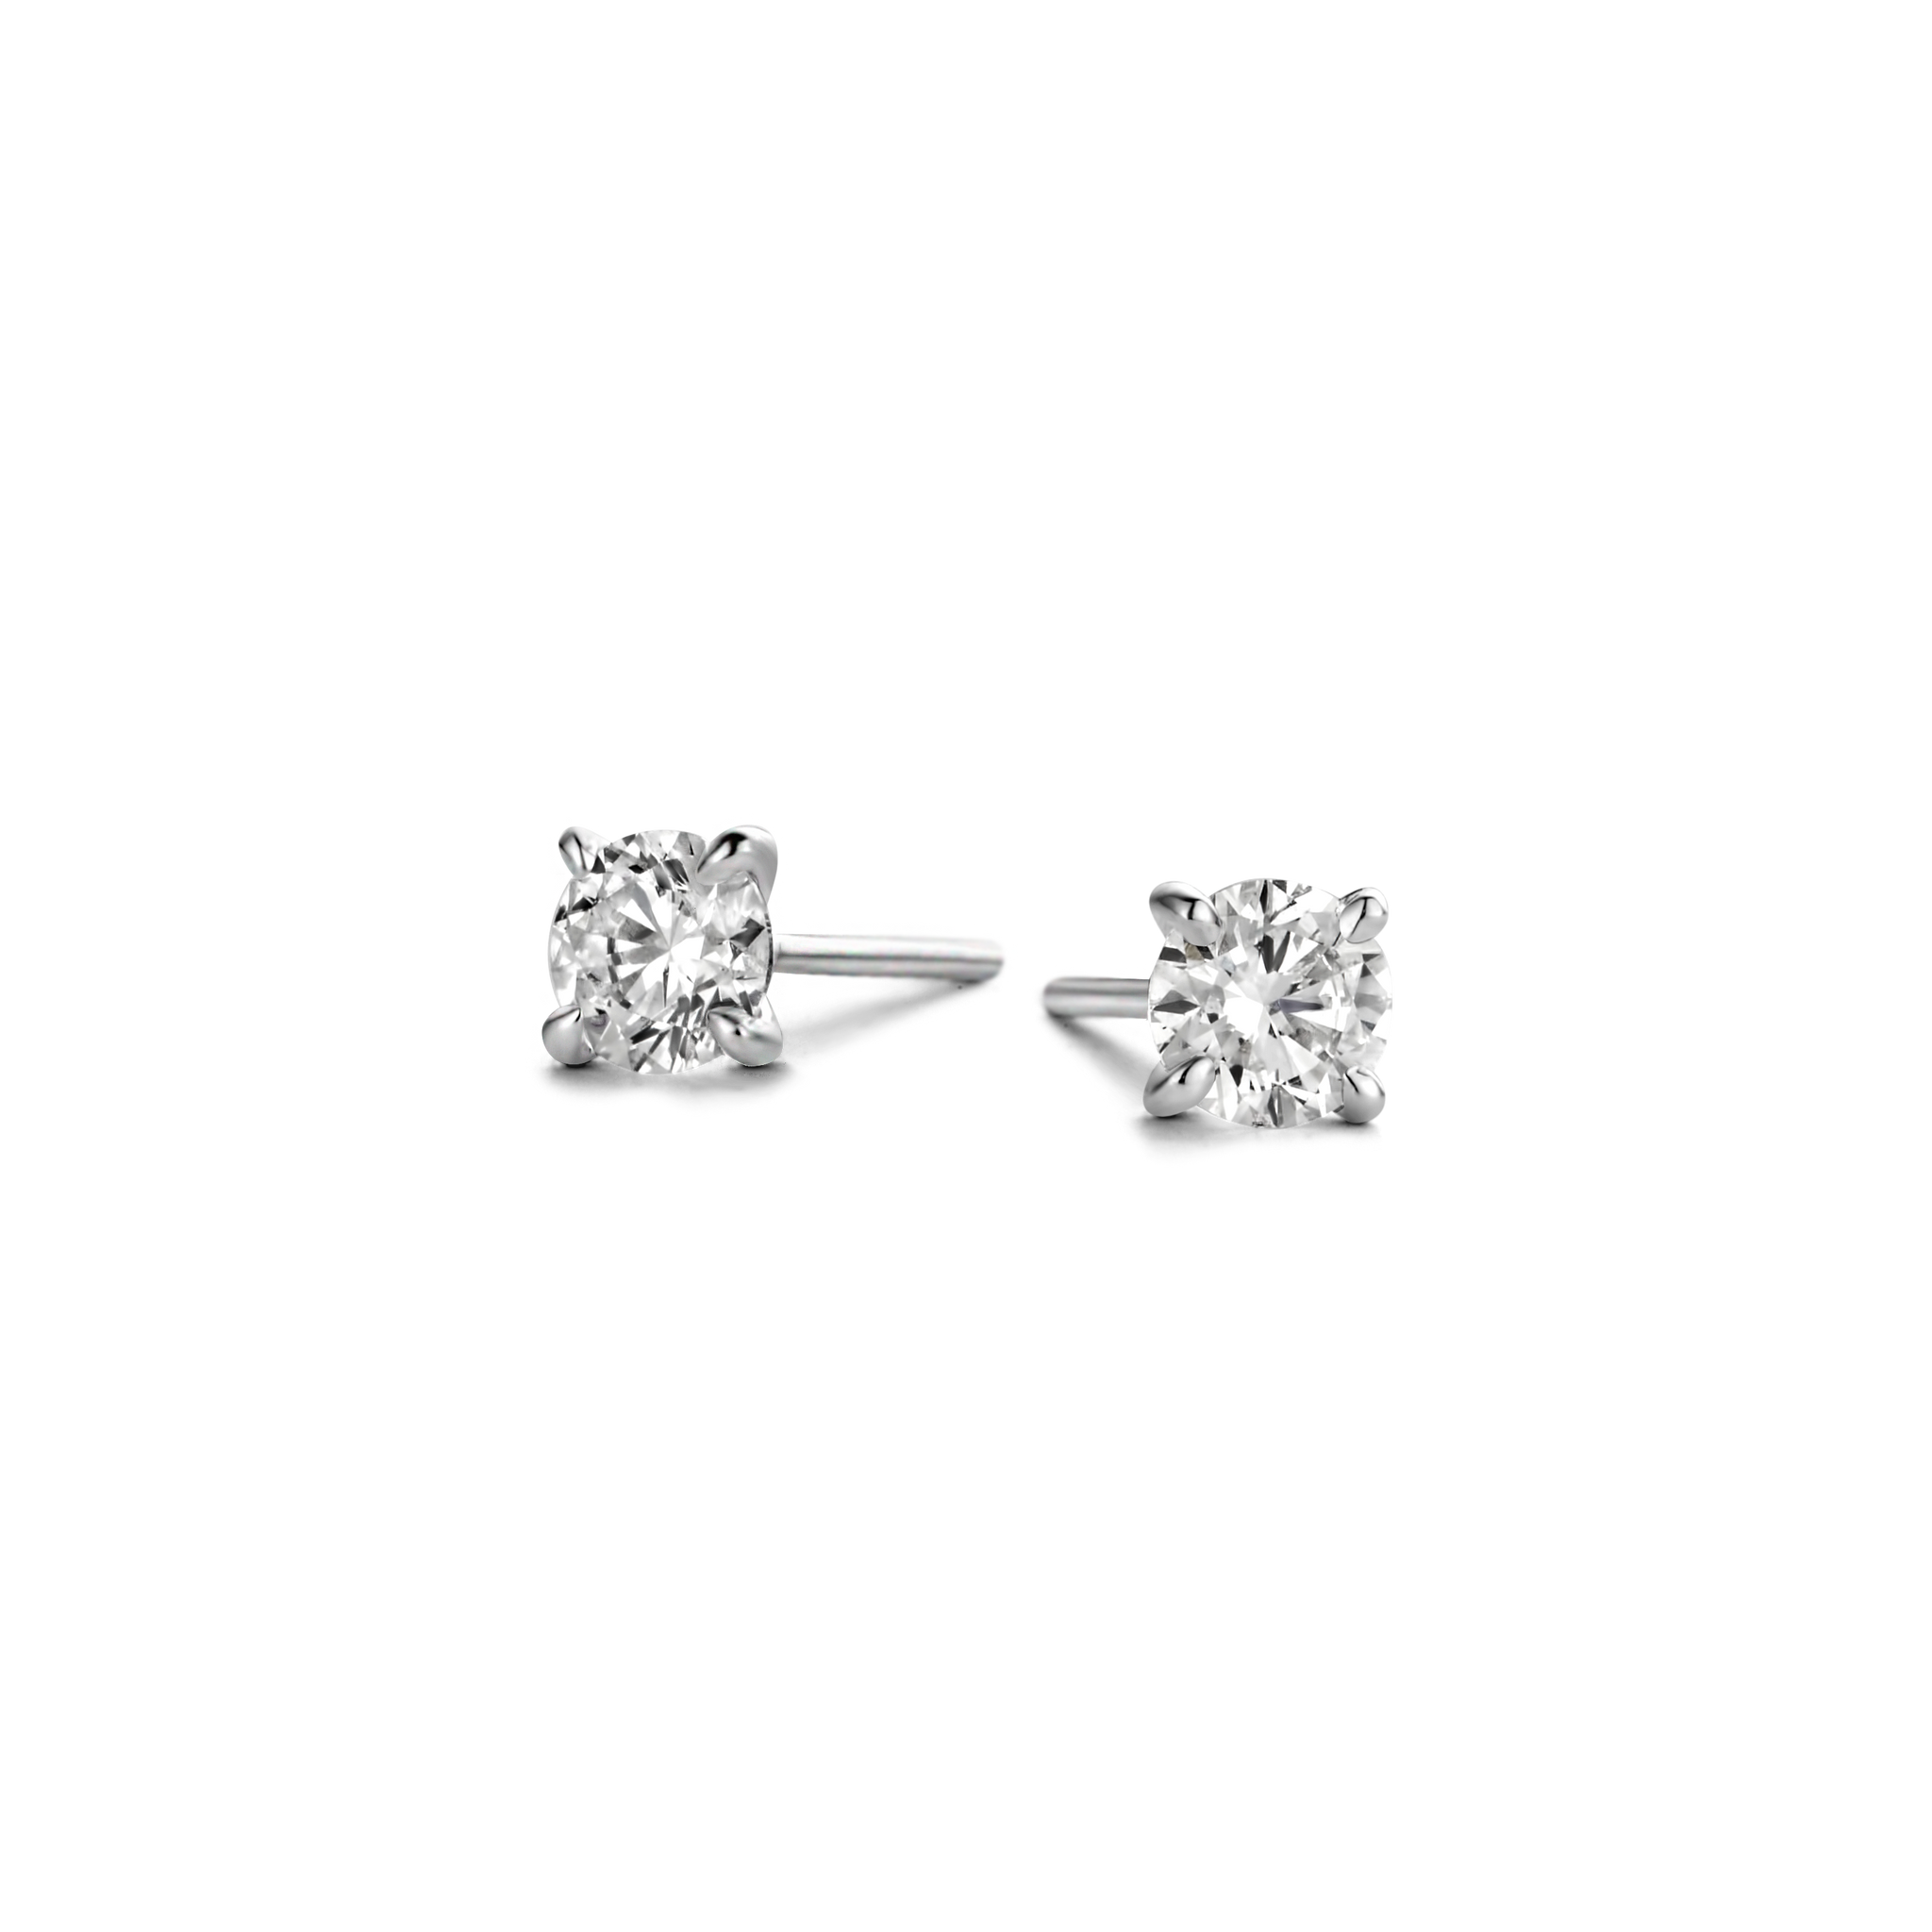 Polished 18k gold is illuminated by a solitaire D color, IF/VVS diamond, the unparalleled quality of which is on full display in a 4-prong setting. Sold as a pair; diamond carat weight refers to the total in the pair of studs. White Gold shown here.